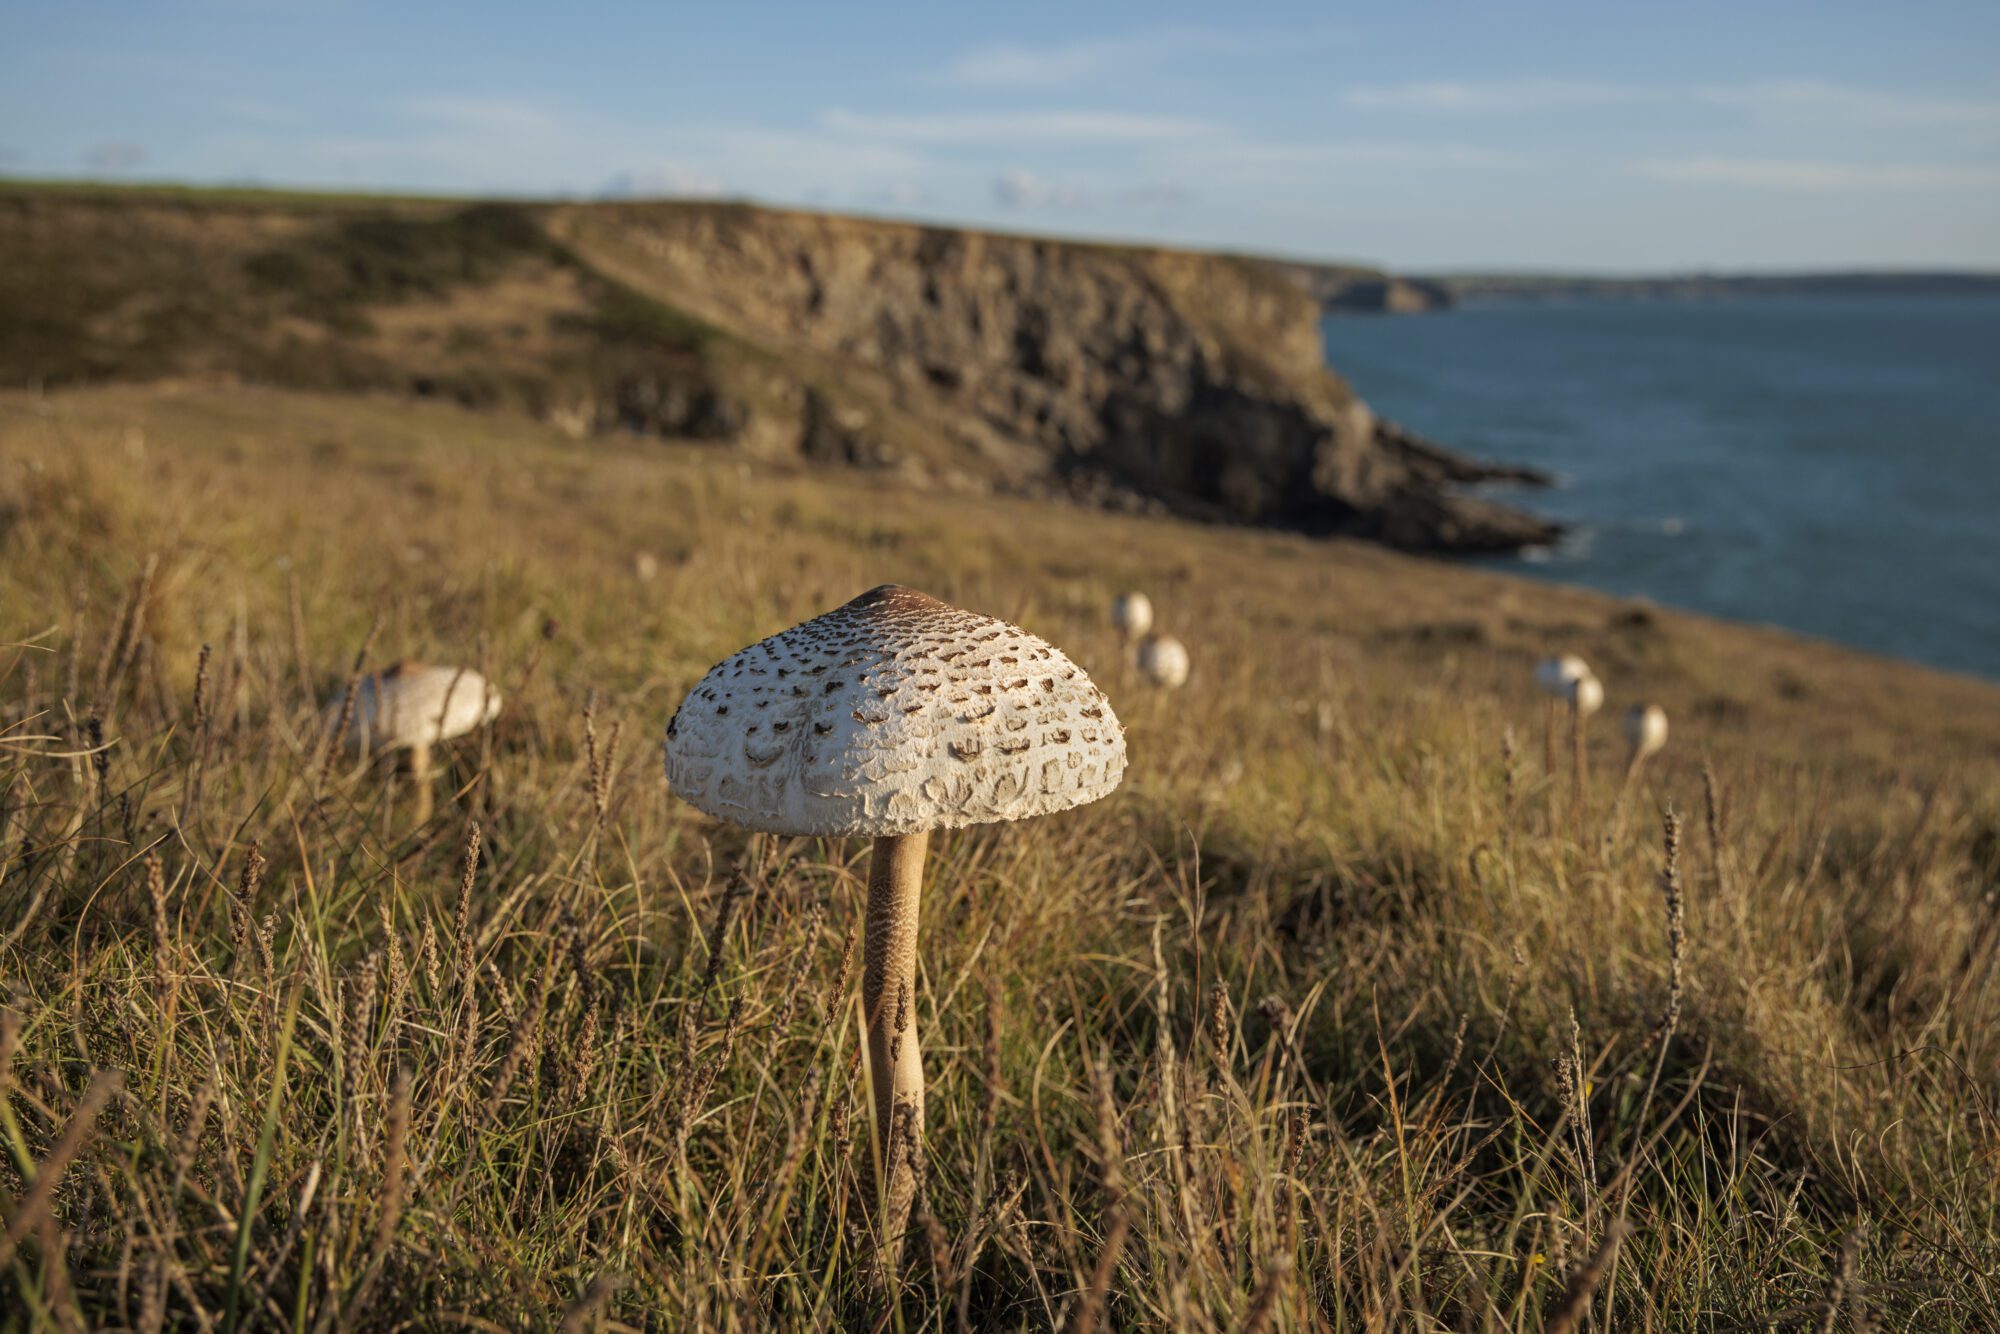 A pale beige mushroom with a thin stalk on a scrubland clifftop. The blue sea is visible in the background, with other mushrooms in the vicinity